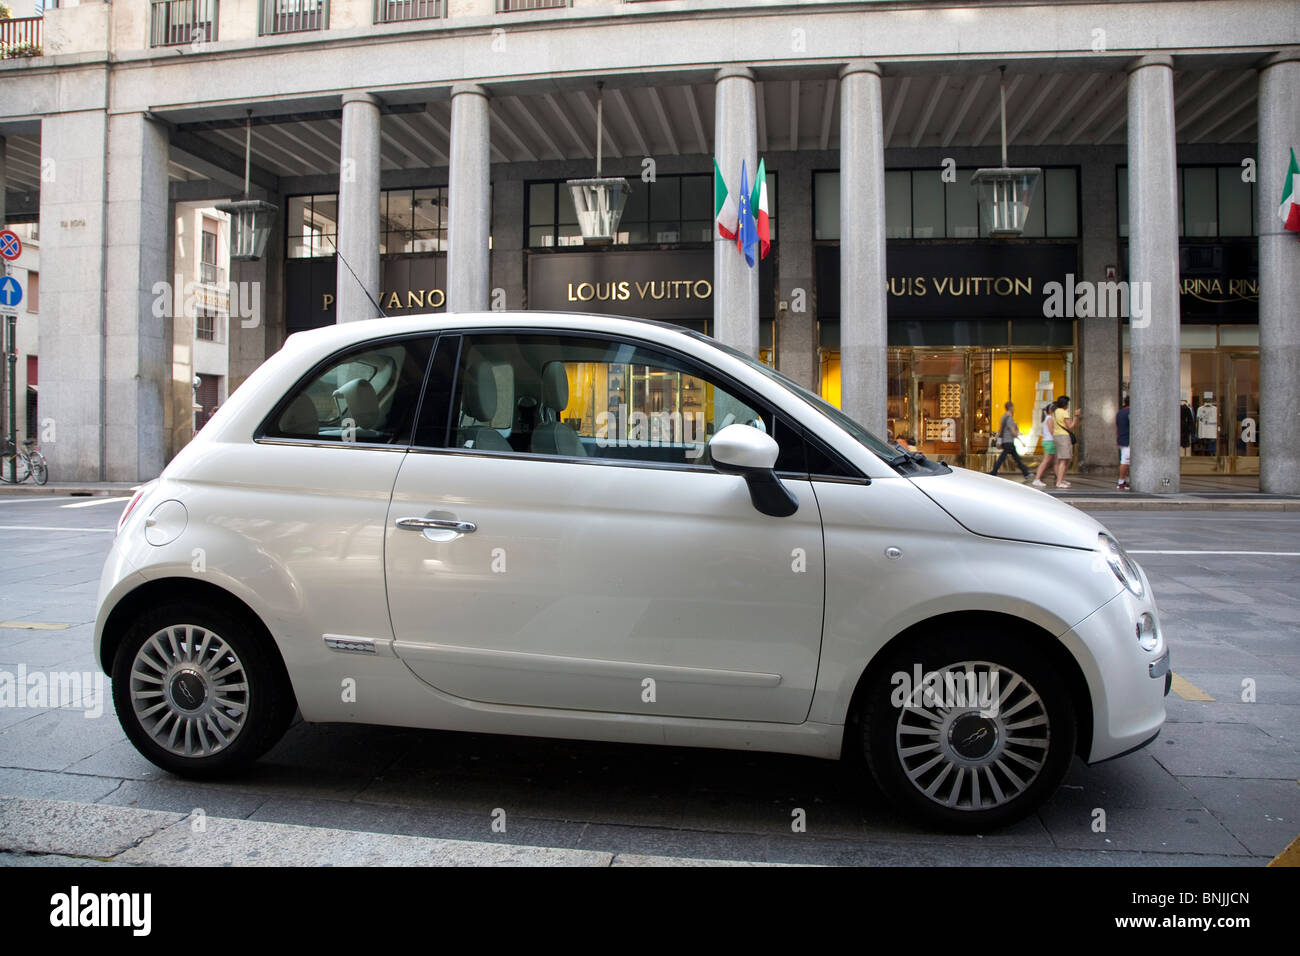 Fiat 500 car outside Louis Vuitton Shop in Via Roma Street in Turin, Italy  Stock Photo - Alamy